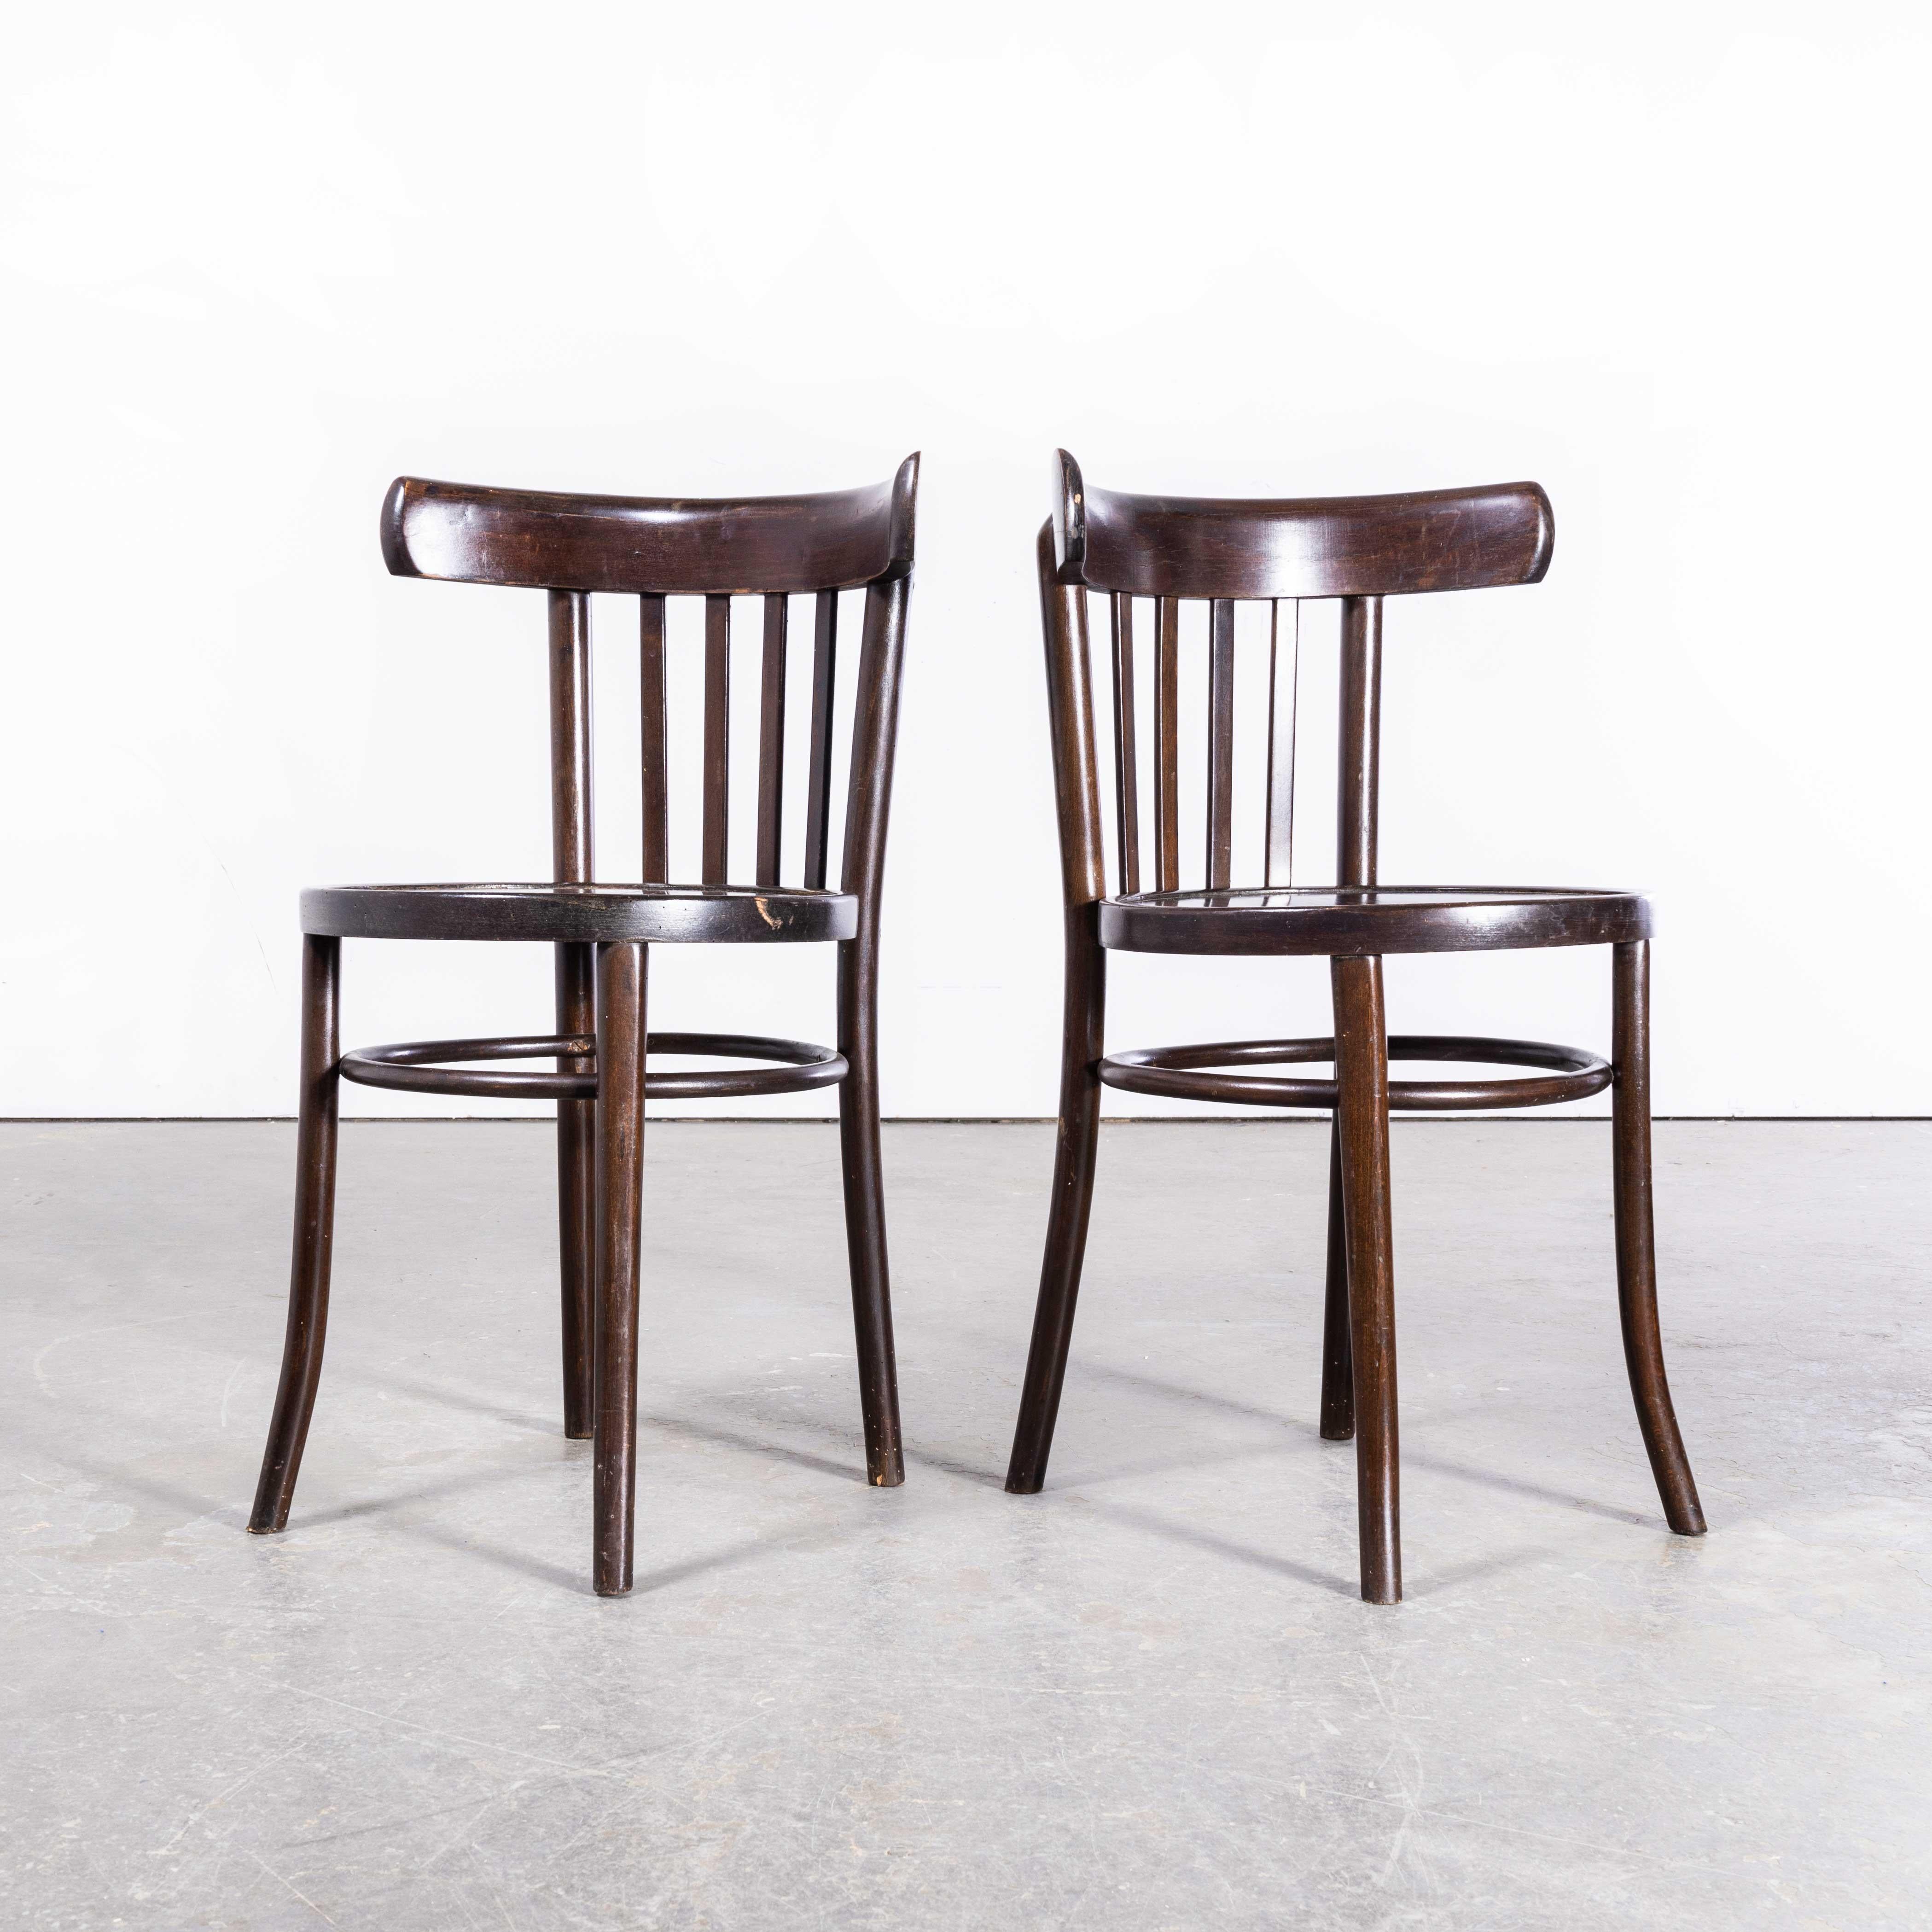 1960s Saddle Back Bistro Dark Walnut Dining Chair – Pair
1960s Saddle Back Bistro Dark Walnut Dining Chair – Pair. Good quality pair of Classic bentwood chairs with a rich dark stain back. The chairs were made in Eastern Europe using solid steam